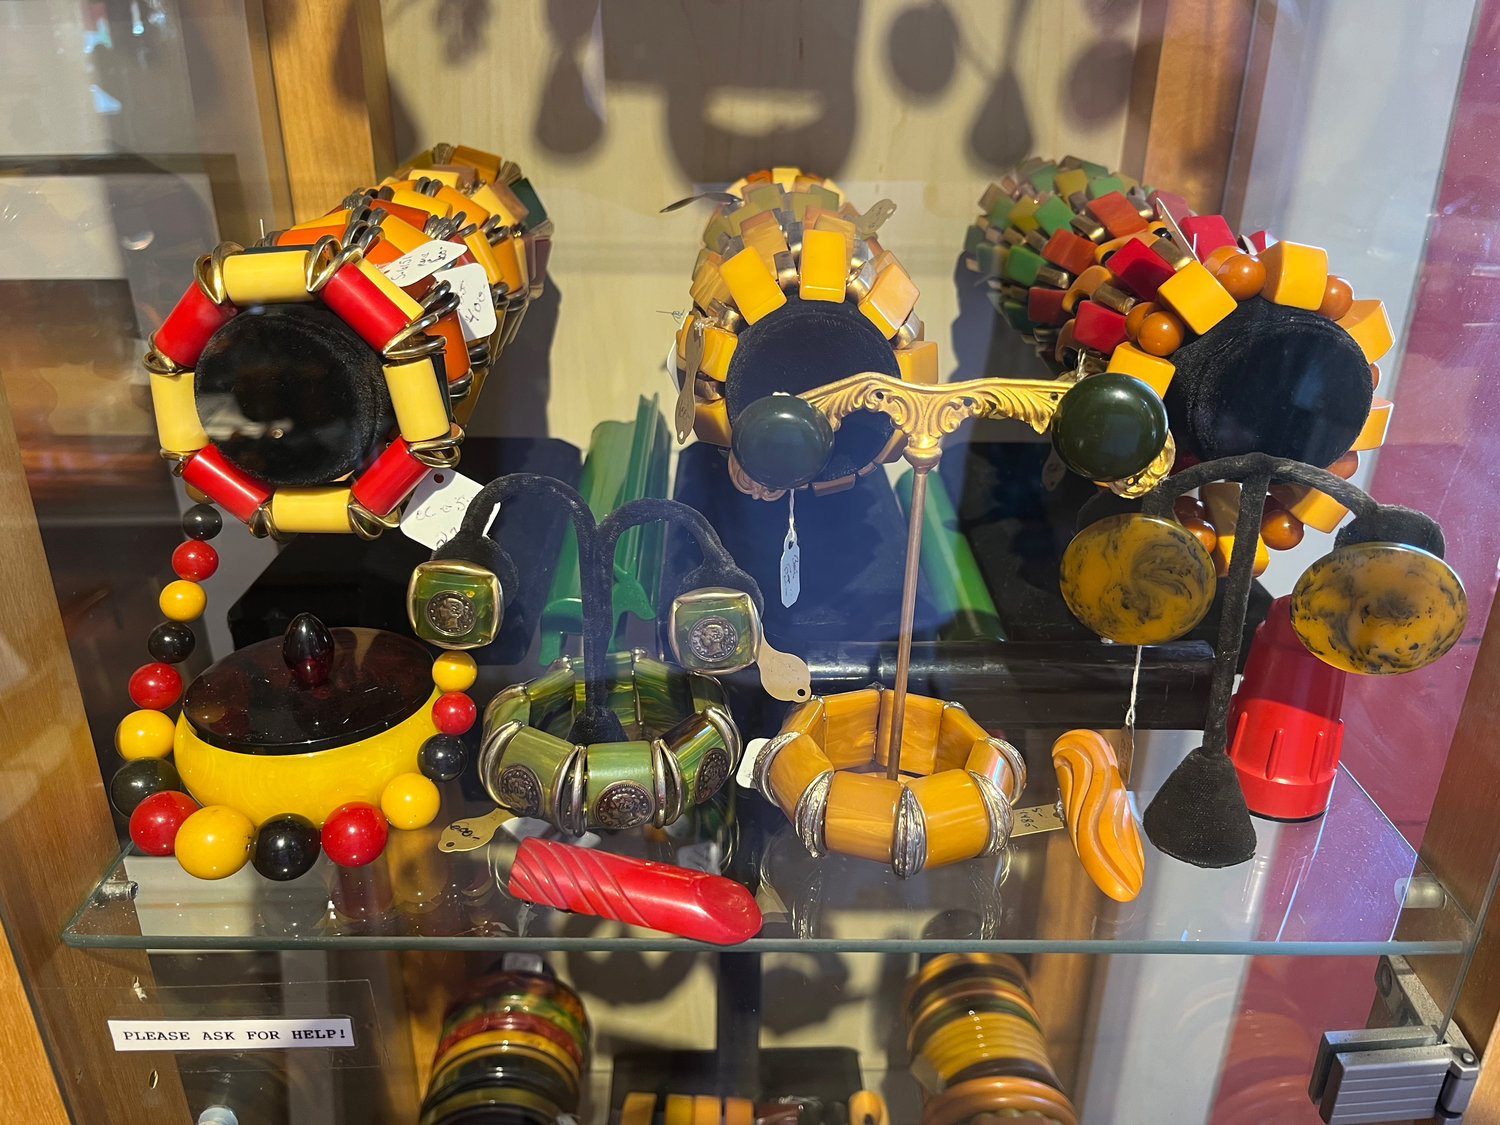 A small sample of the gallery’s extensive collection of vintage Bakelite jewelry.